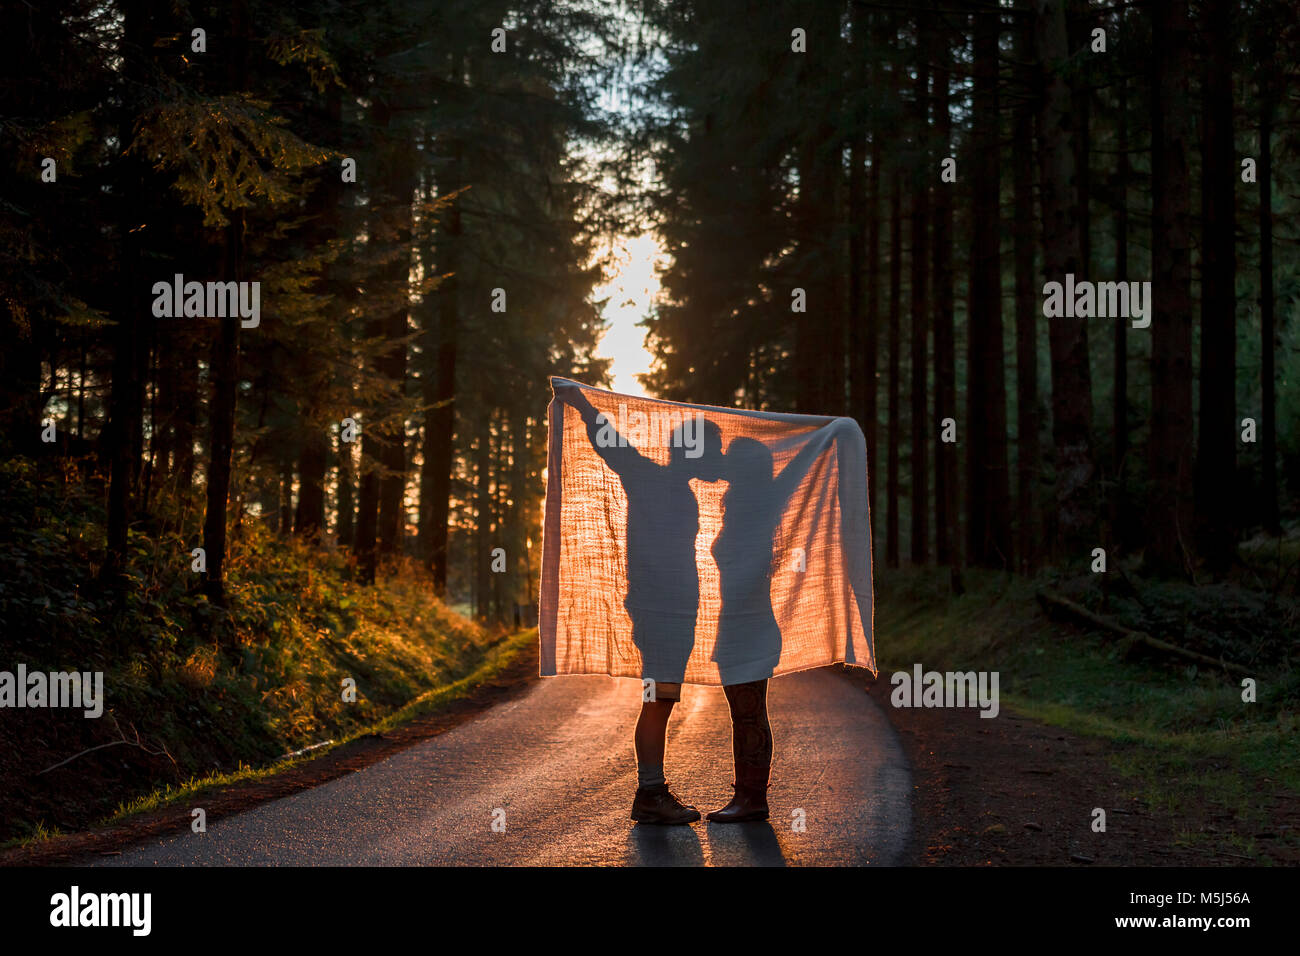 Silhouette of couple holding blanket kissing on country road in forest Stock Photo